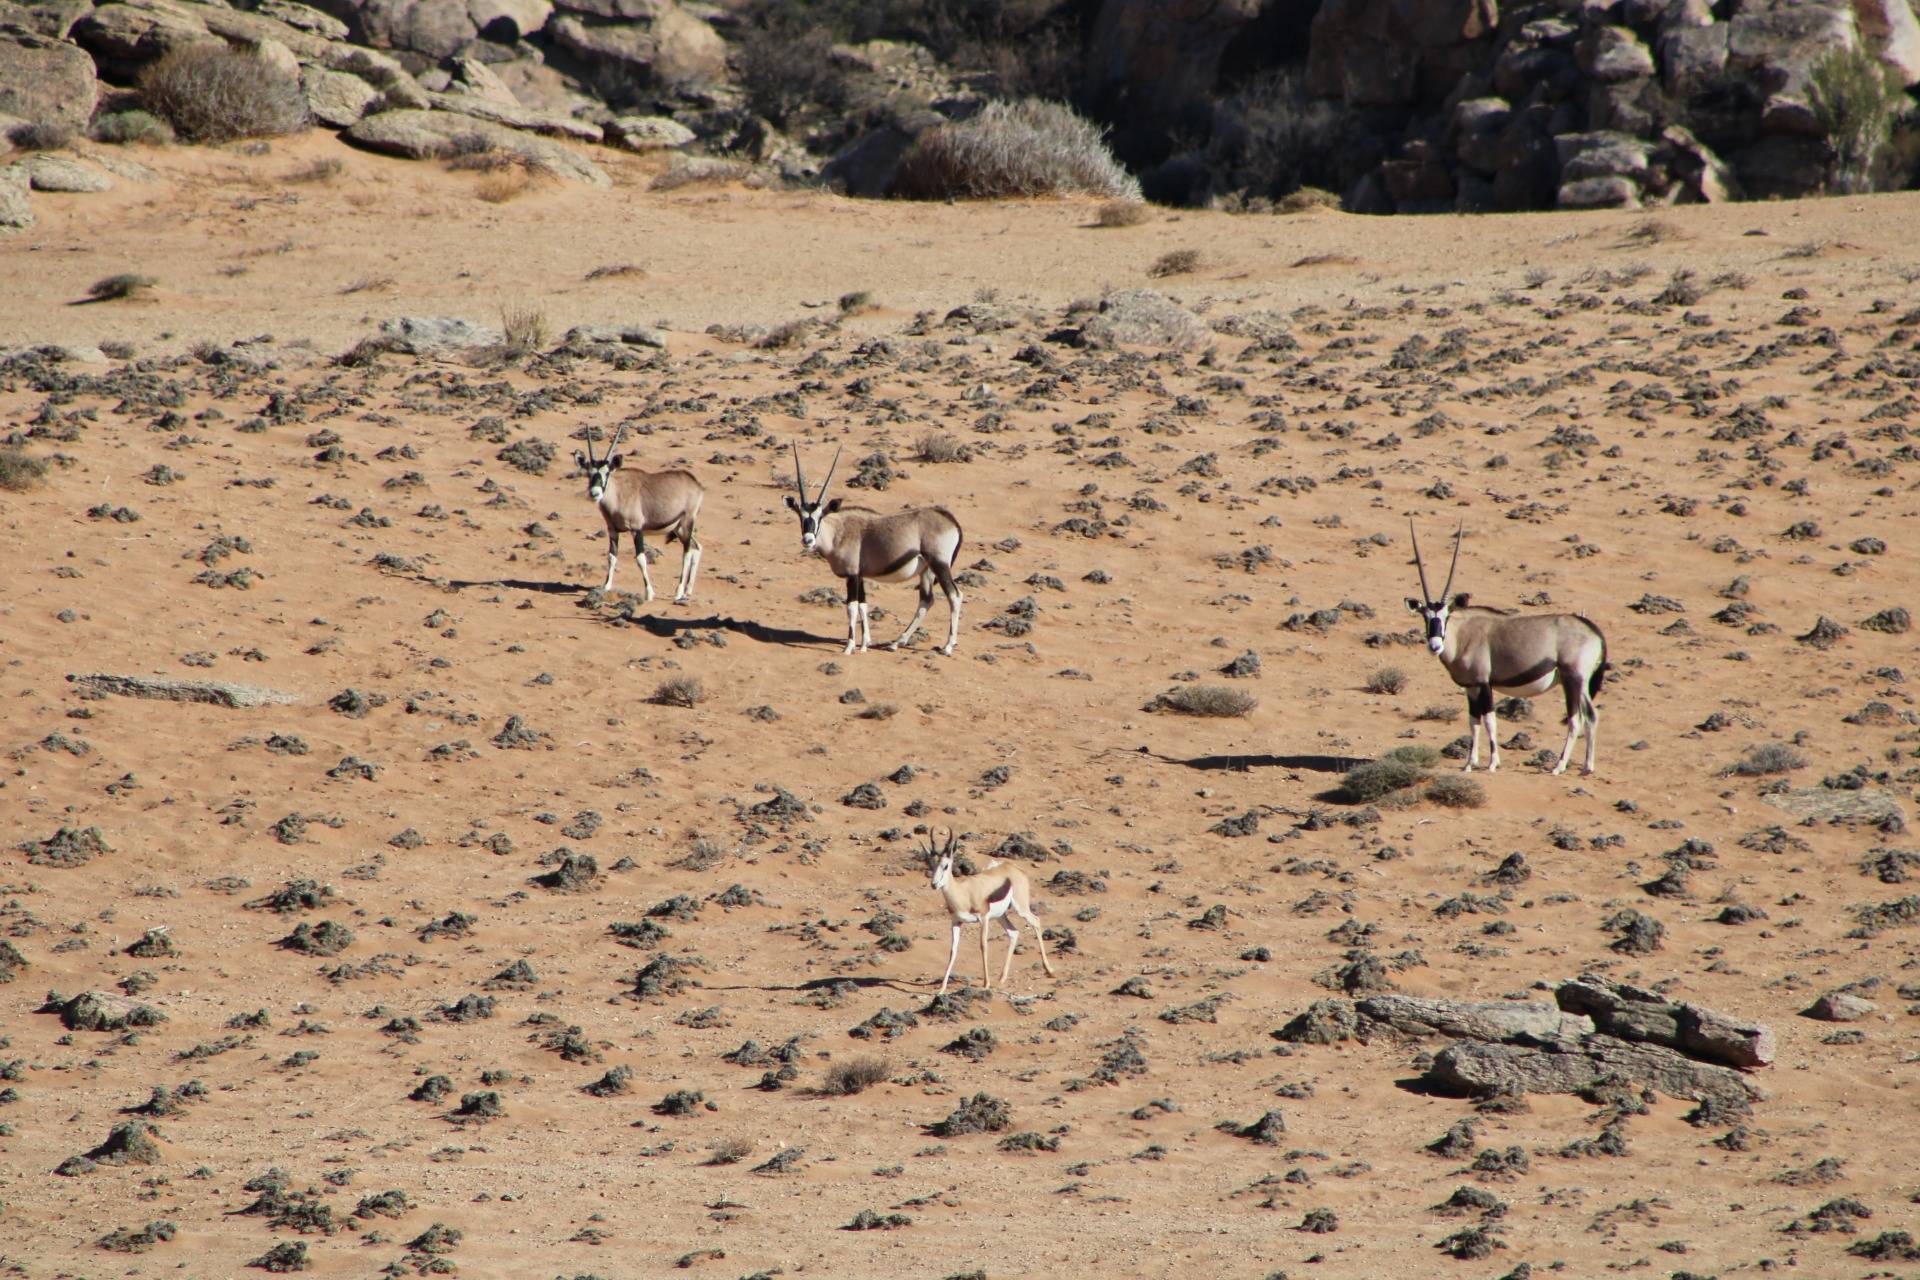 Some Gemsbokke, and a lonely Springbok (South Africa's national animal).